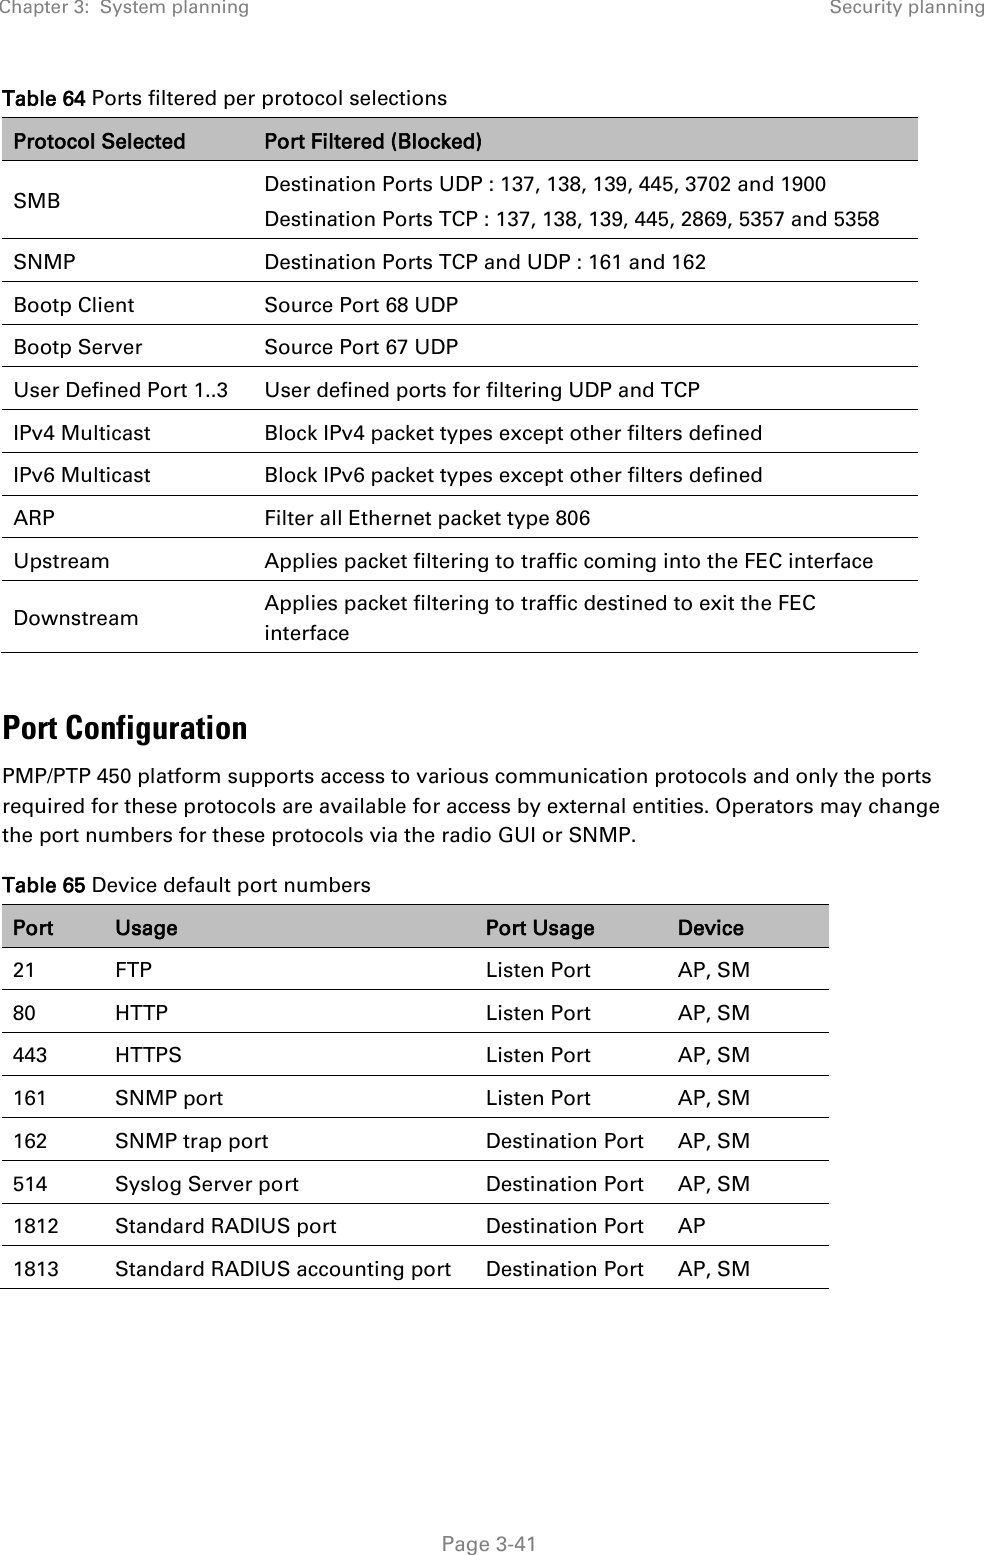 Chapter 3:  System planning Security planning   Page 3-41 Table 64 Ports filtered per protocol selections   Port Configuration PMP/PTP 450 platform supports access to various communication protocols and only the ports required for these protocols are available for access by external entities. Operators may change the port numbers for these protocols via the radio GUI or SNMP. Table 65 Device default port numbers Port Usage Port Usage Device 21 FTP Listen Port AP, SM 80 HTTP Listen Port AP, SM 443 HTTPS Listen Port AP, SM 161 SNMP port Listen Port AP, SM 162 SNMP trap port Destination Port AP, SM 514 Syslog Server port Destination Port AP, SM 1812 Standard RADIUS port Destination Port AP 1813 Standard RADIUS accounting port Destination Port AP, SM    Protocol Selected Port Filtered (Blocked) SMB Destination Ports UDP : 137, 138, 139, 445, 3702 and 1900 Destination Ports TCP : 137, 138, 139, 445, 2869, 5357 and 5358 SNMP Destination Ports TCP and UDP : 161 and 162 Bootp Client Source Port 68 UDP Bootp Server Source Port 67 UDP User Defined Port 1..3 User defined ports for filtering UDP and TCP IPv4 Multicast Block IPv4 packet types except other filters defined IPv6 Multicast Block IPv6 packet types except other filters defined ARP Filter all Ethernet packet type 806 Upstream  Applies packet filtering to traffic coming into the FEC interface Downstream Applies packet filtering to traffic destined to exit the FEC interface 